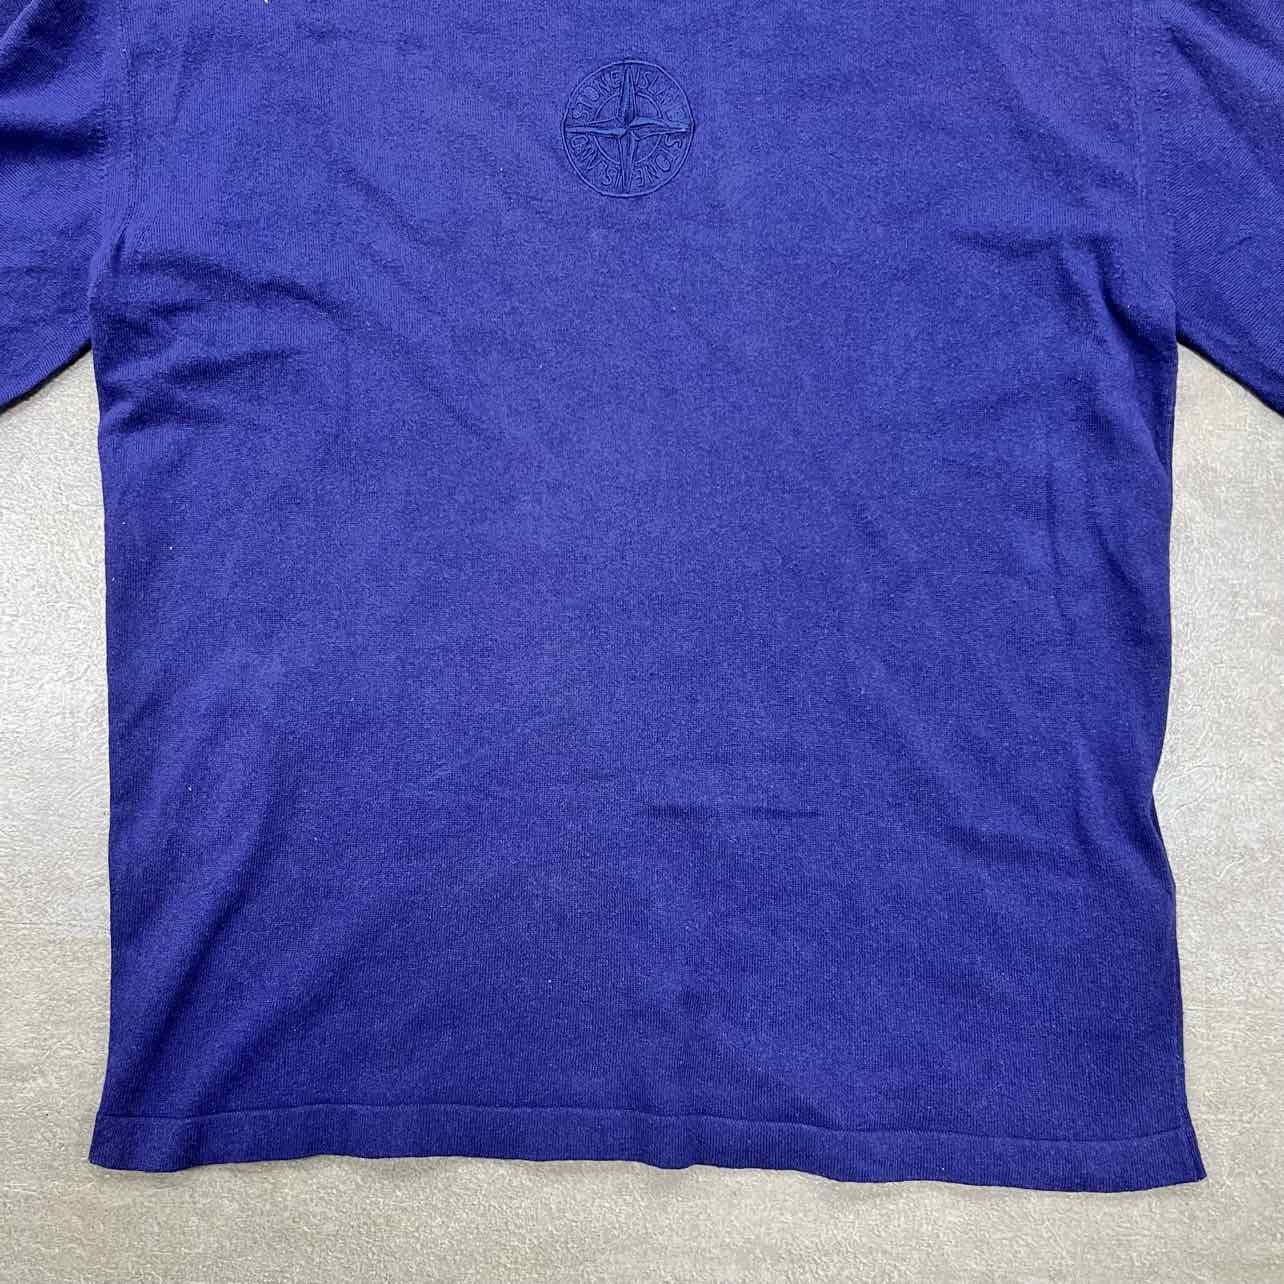 Stone Island T-Shirt &quot;COMPASS&quot; Navy Used Size M